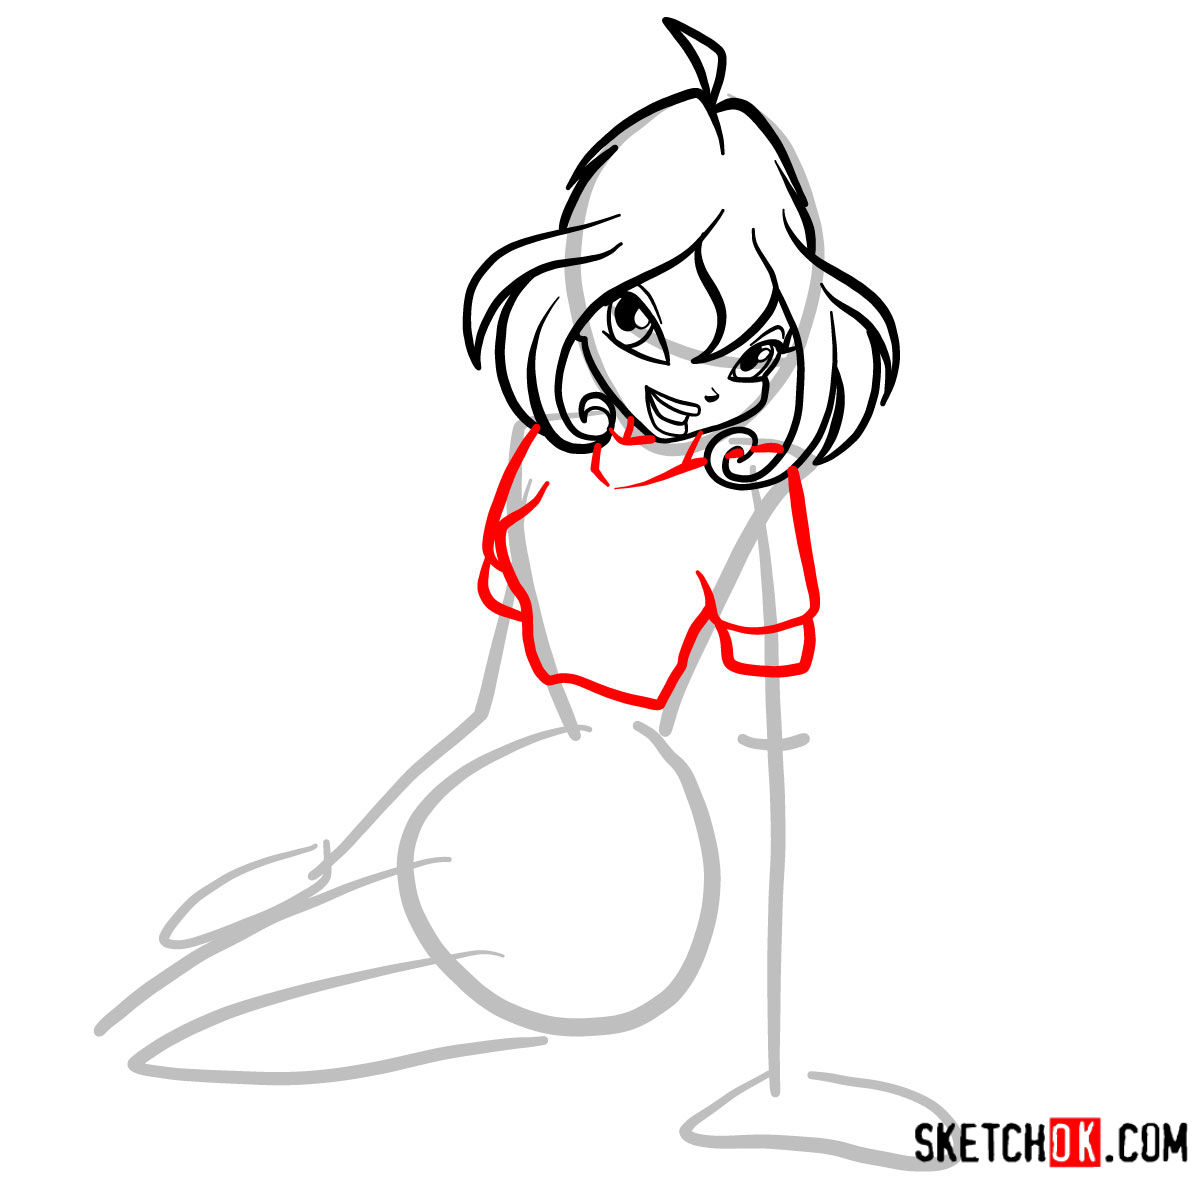 How to draw Bloom fire fairy sitting and smiling - step 05